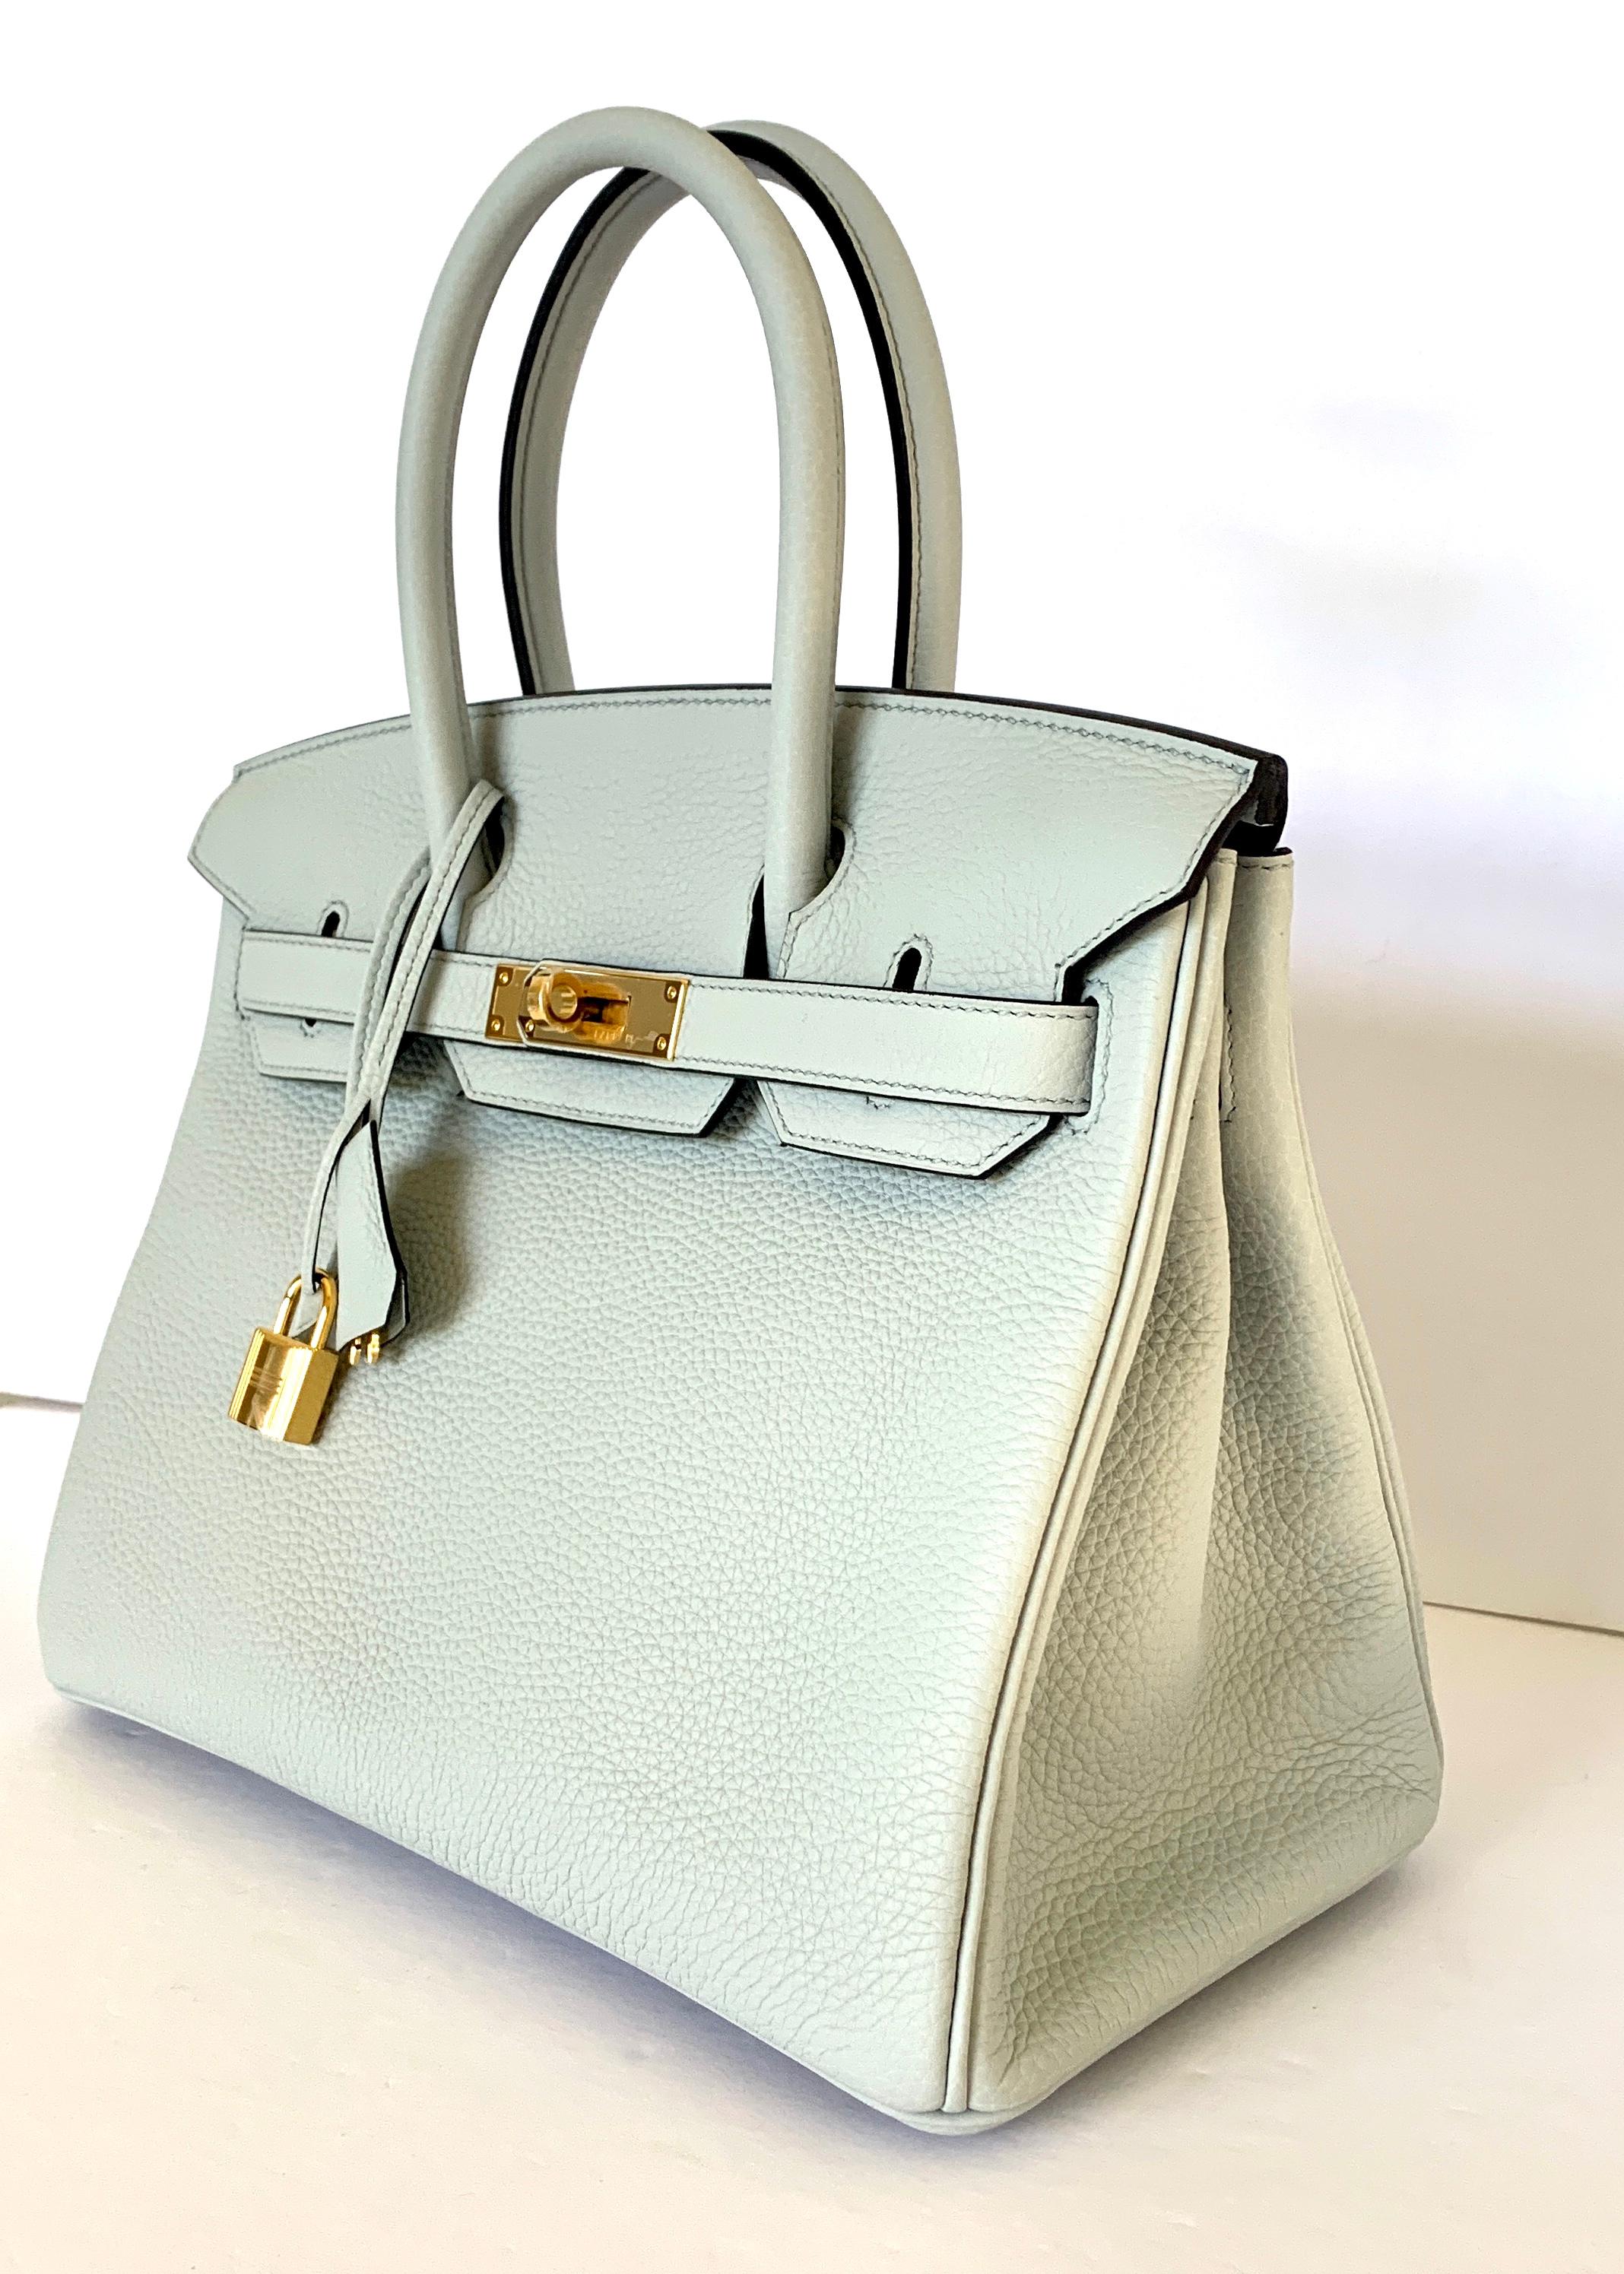 Hermès Birkin 30cm
New Color Blue Pale
Taurillon Clemence Leather
Gold Hardware
Stunning new Birkin
Tonal stitiching
Two straps with front toggle closure, clochette with lock and two keys and double rolled handles.
Approx measurements: 11.75